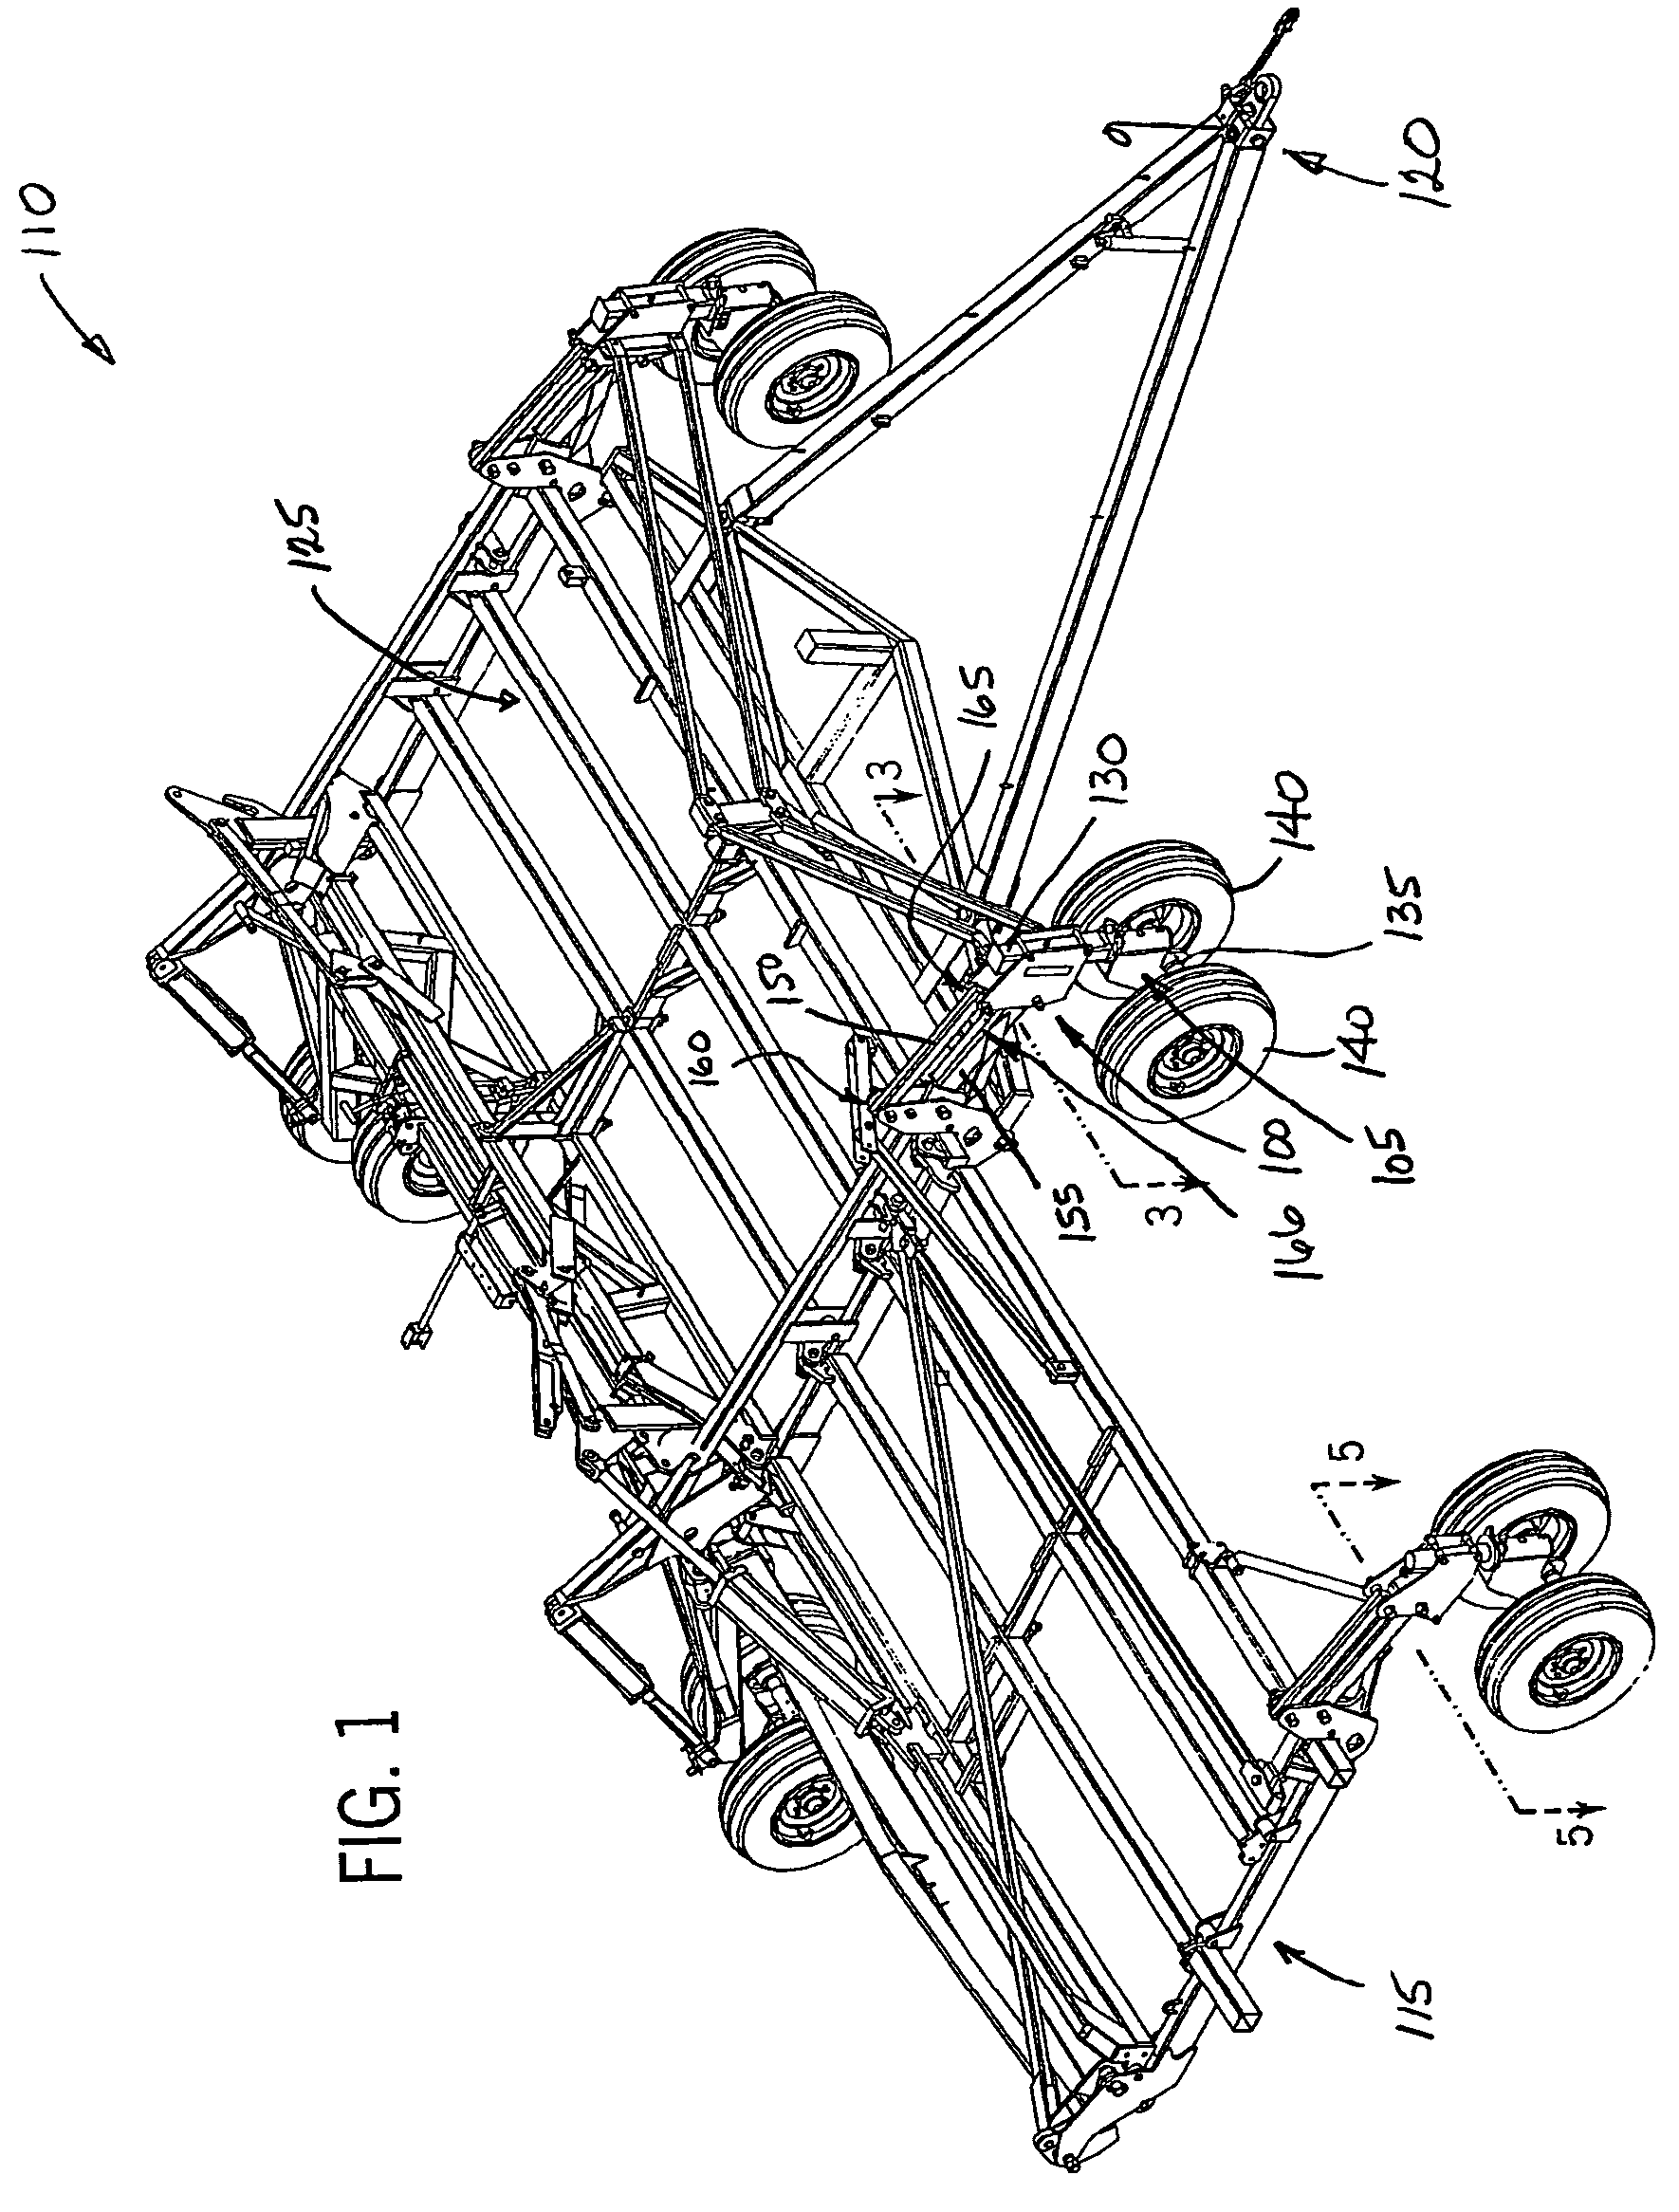 Pivotal connector assembly